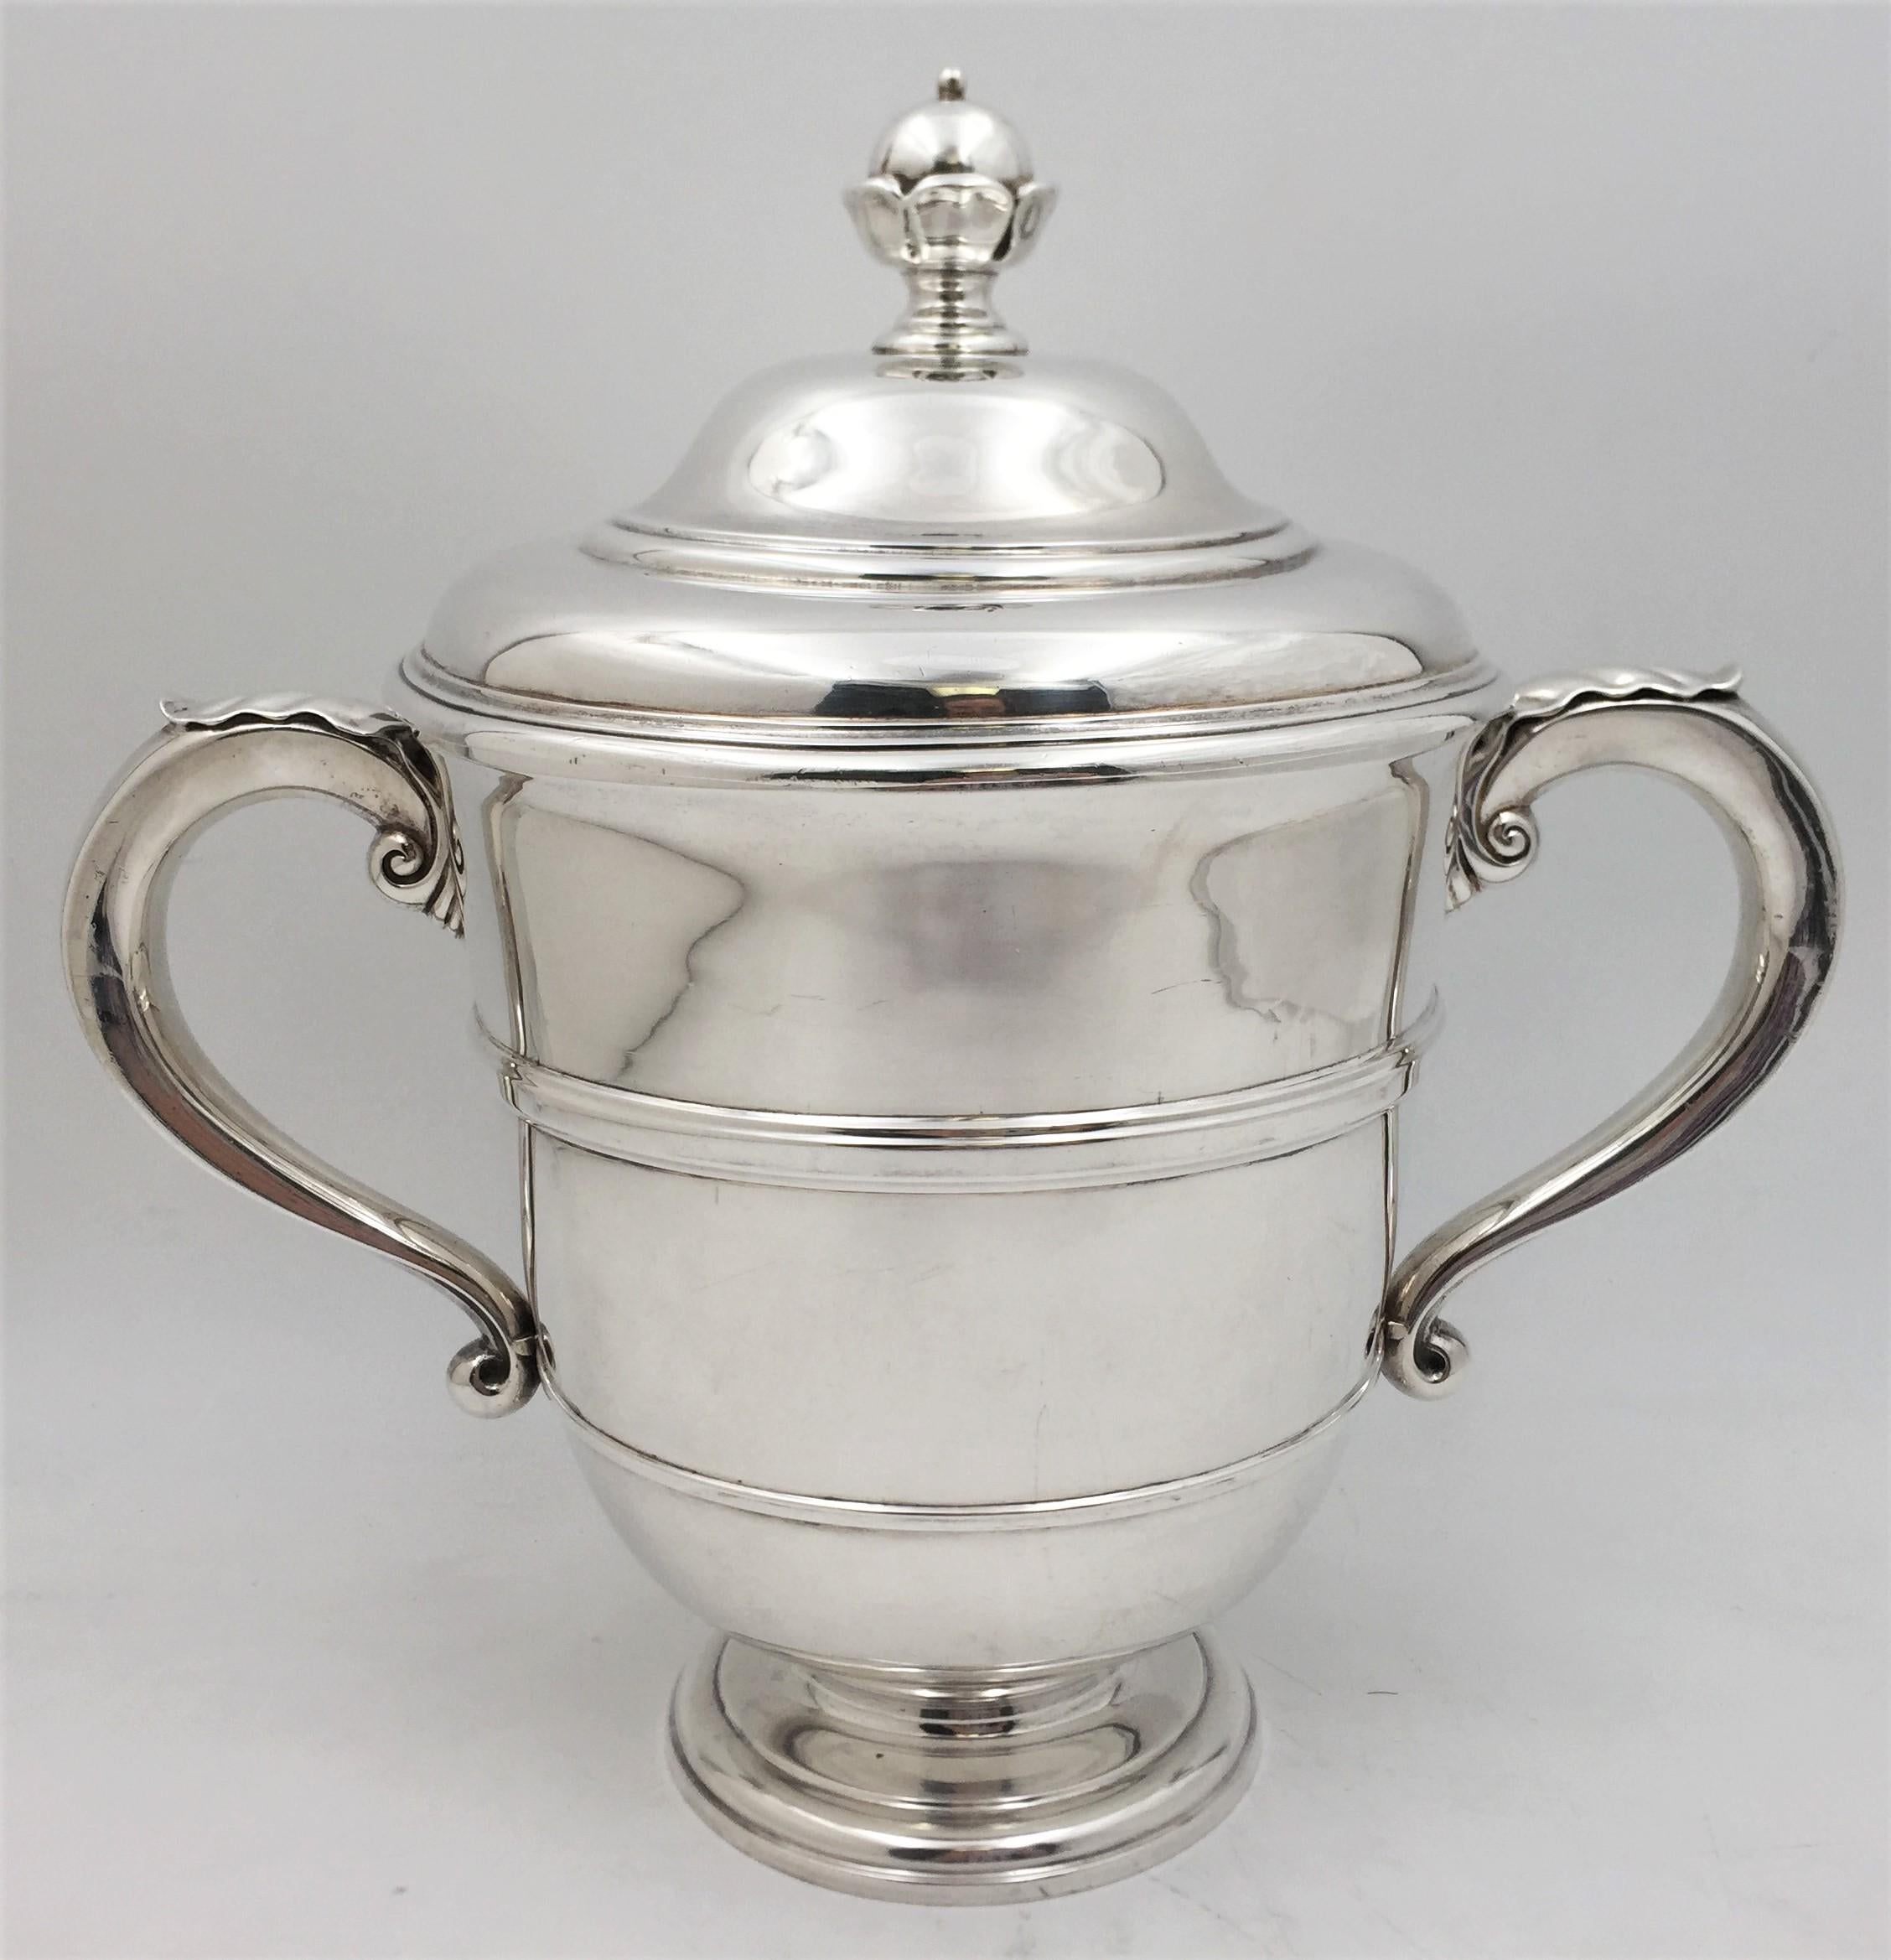 Crichton & Co., English silver two-handled trophy or urn from 1917 in exquisite Georgian style with elegant proportions. The handles have an applied leaf design, adding to the grace of the design. The body has a beautifully engraved monogram and two